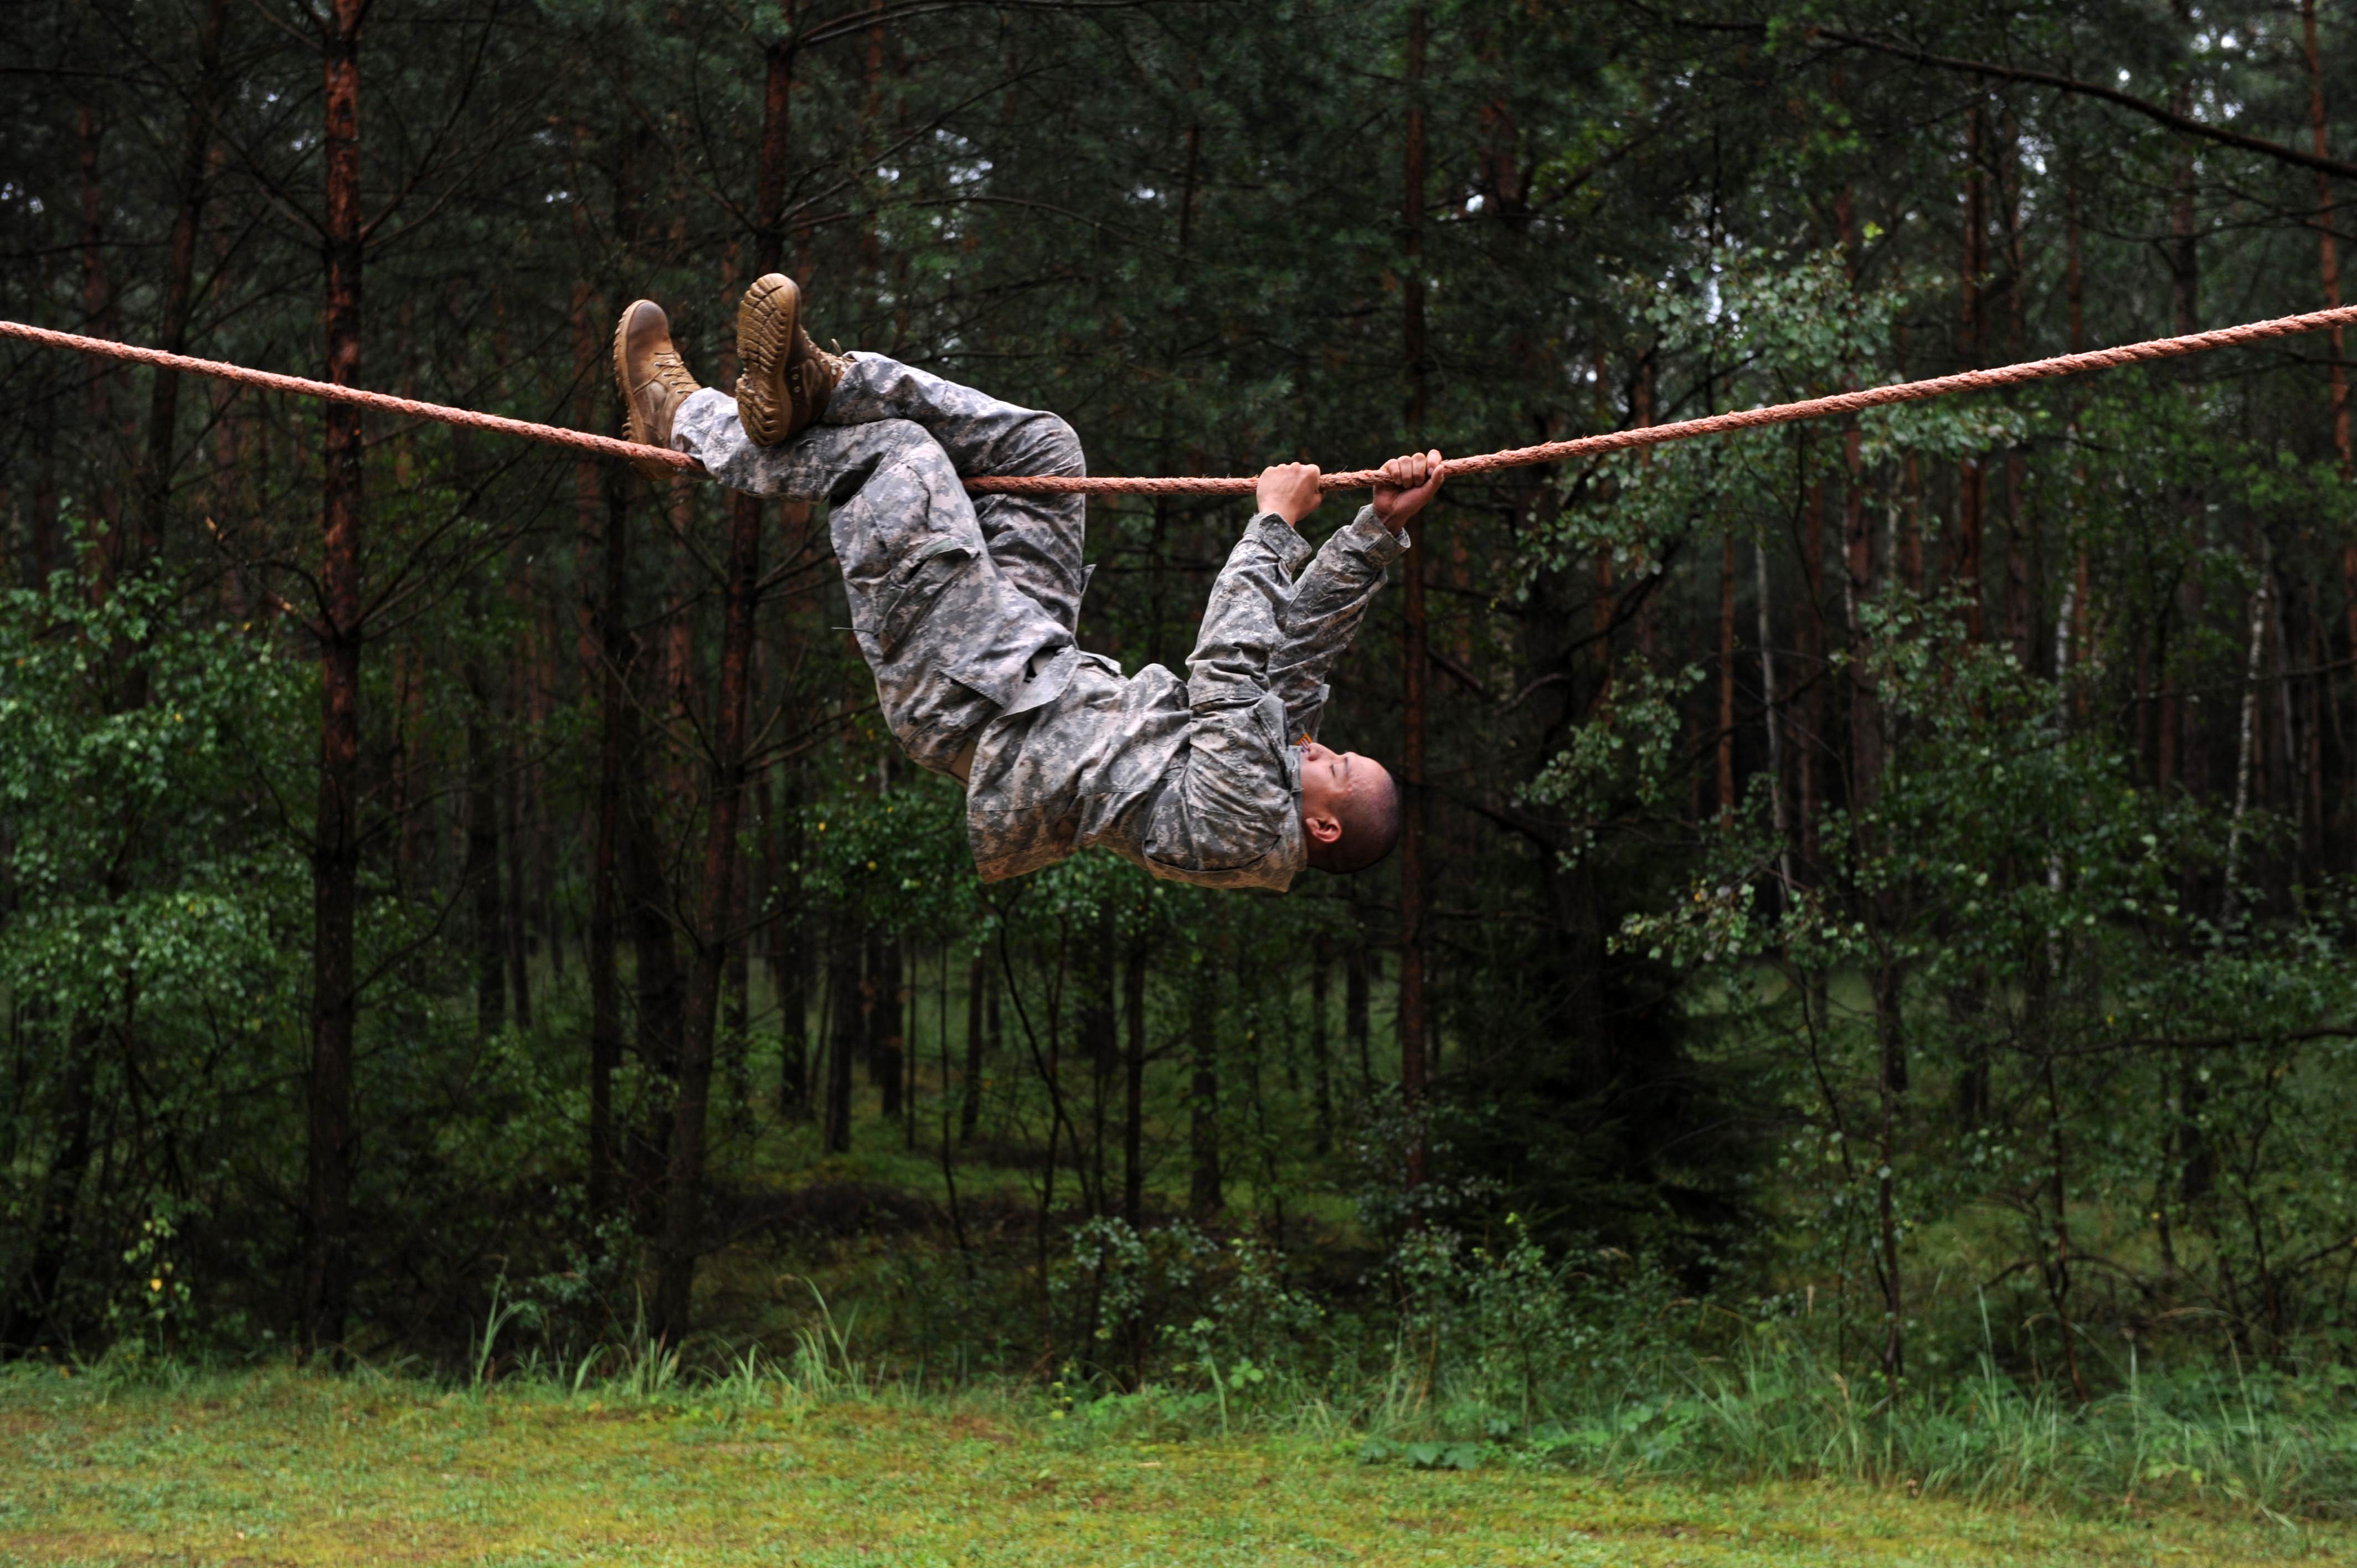 AFENWOEHR, Germany - Spc. Leroy Suquitana, a USARUER HHBN Soldier working  as a reception cell clerk, negotiates the rope-bridge obstacle 20 Aug.  during the 2013 Best Warrior Competition's obstacle course here. The